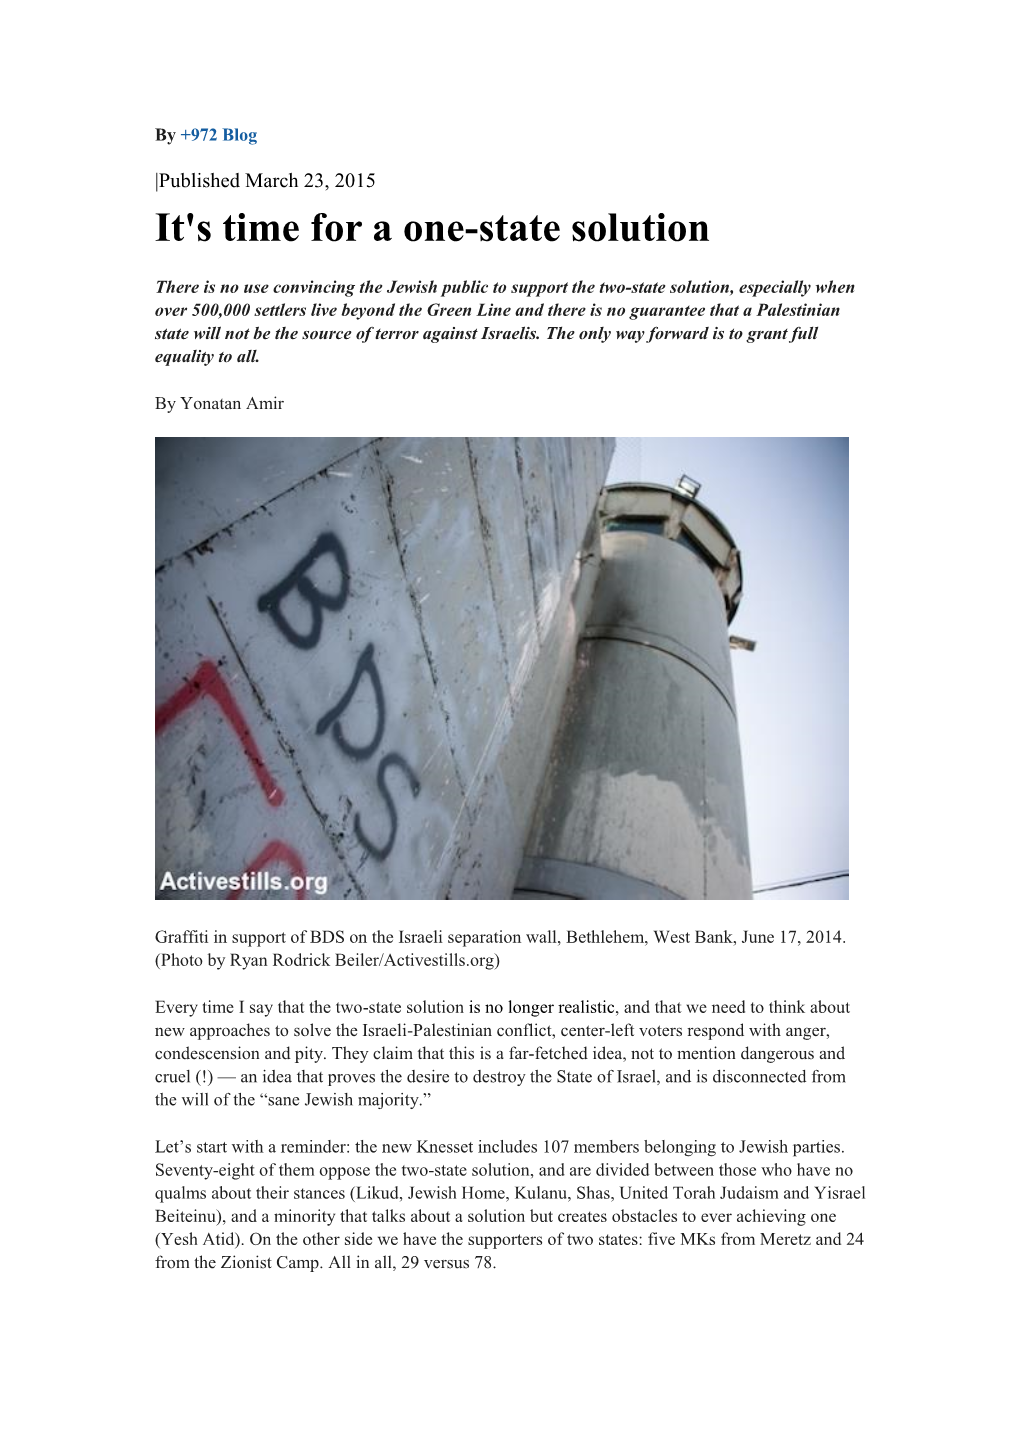 It's Time for a One-State Solution